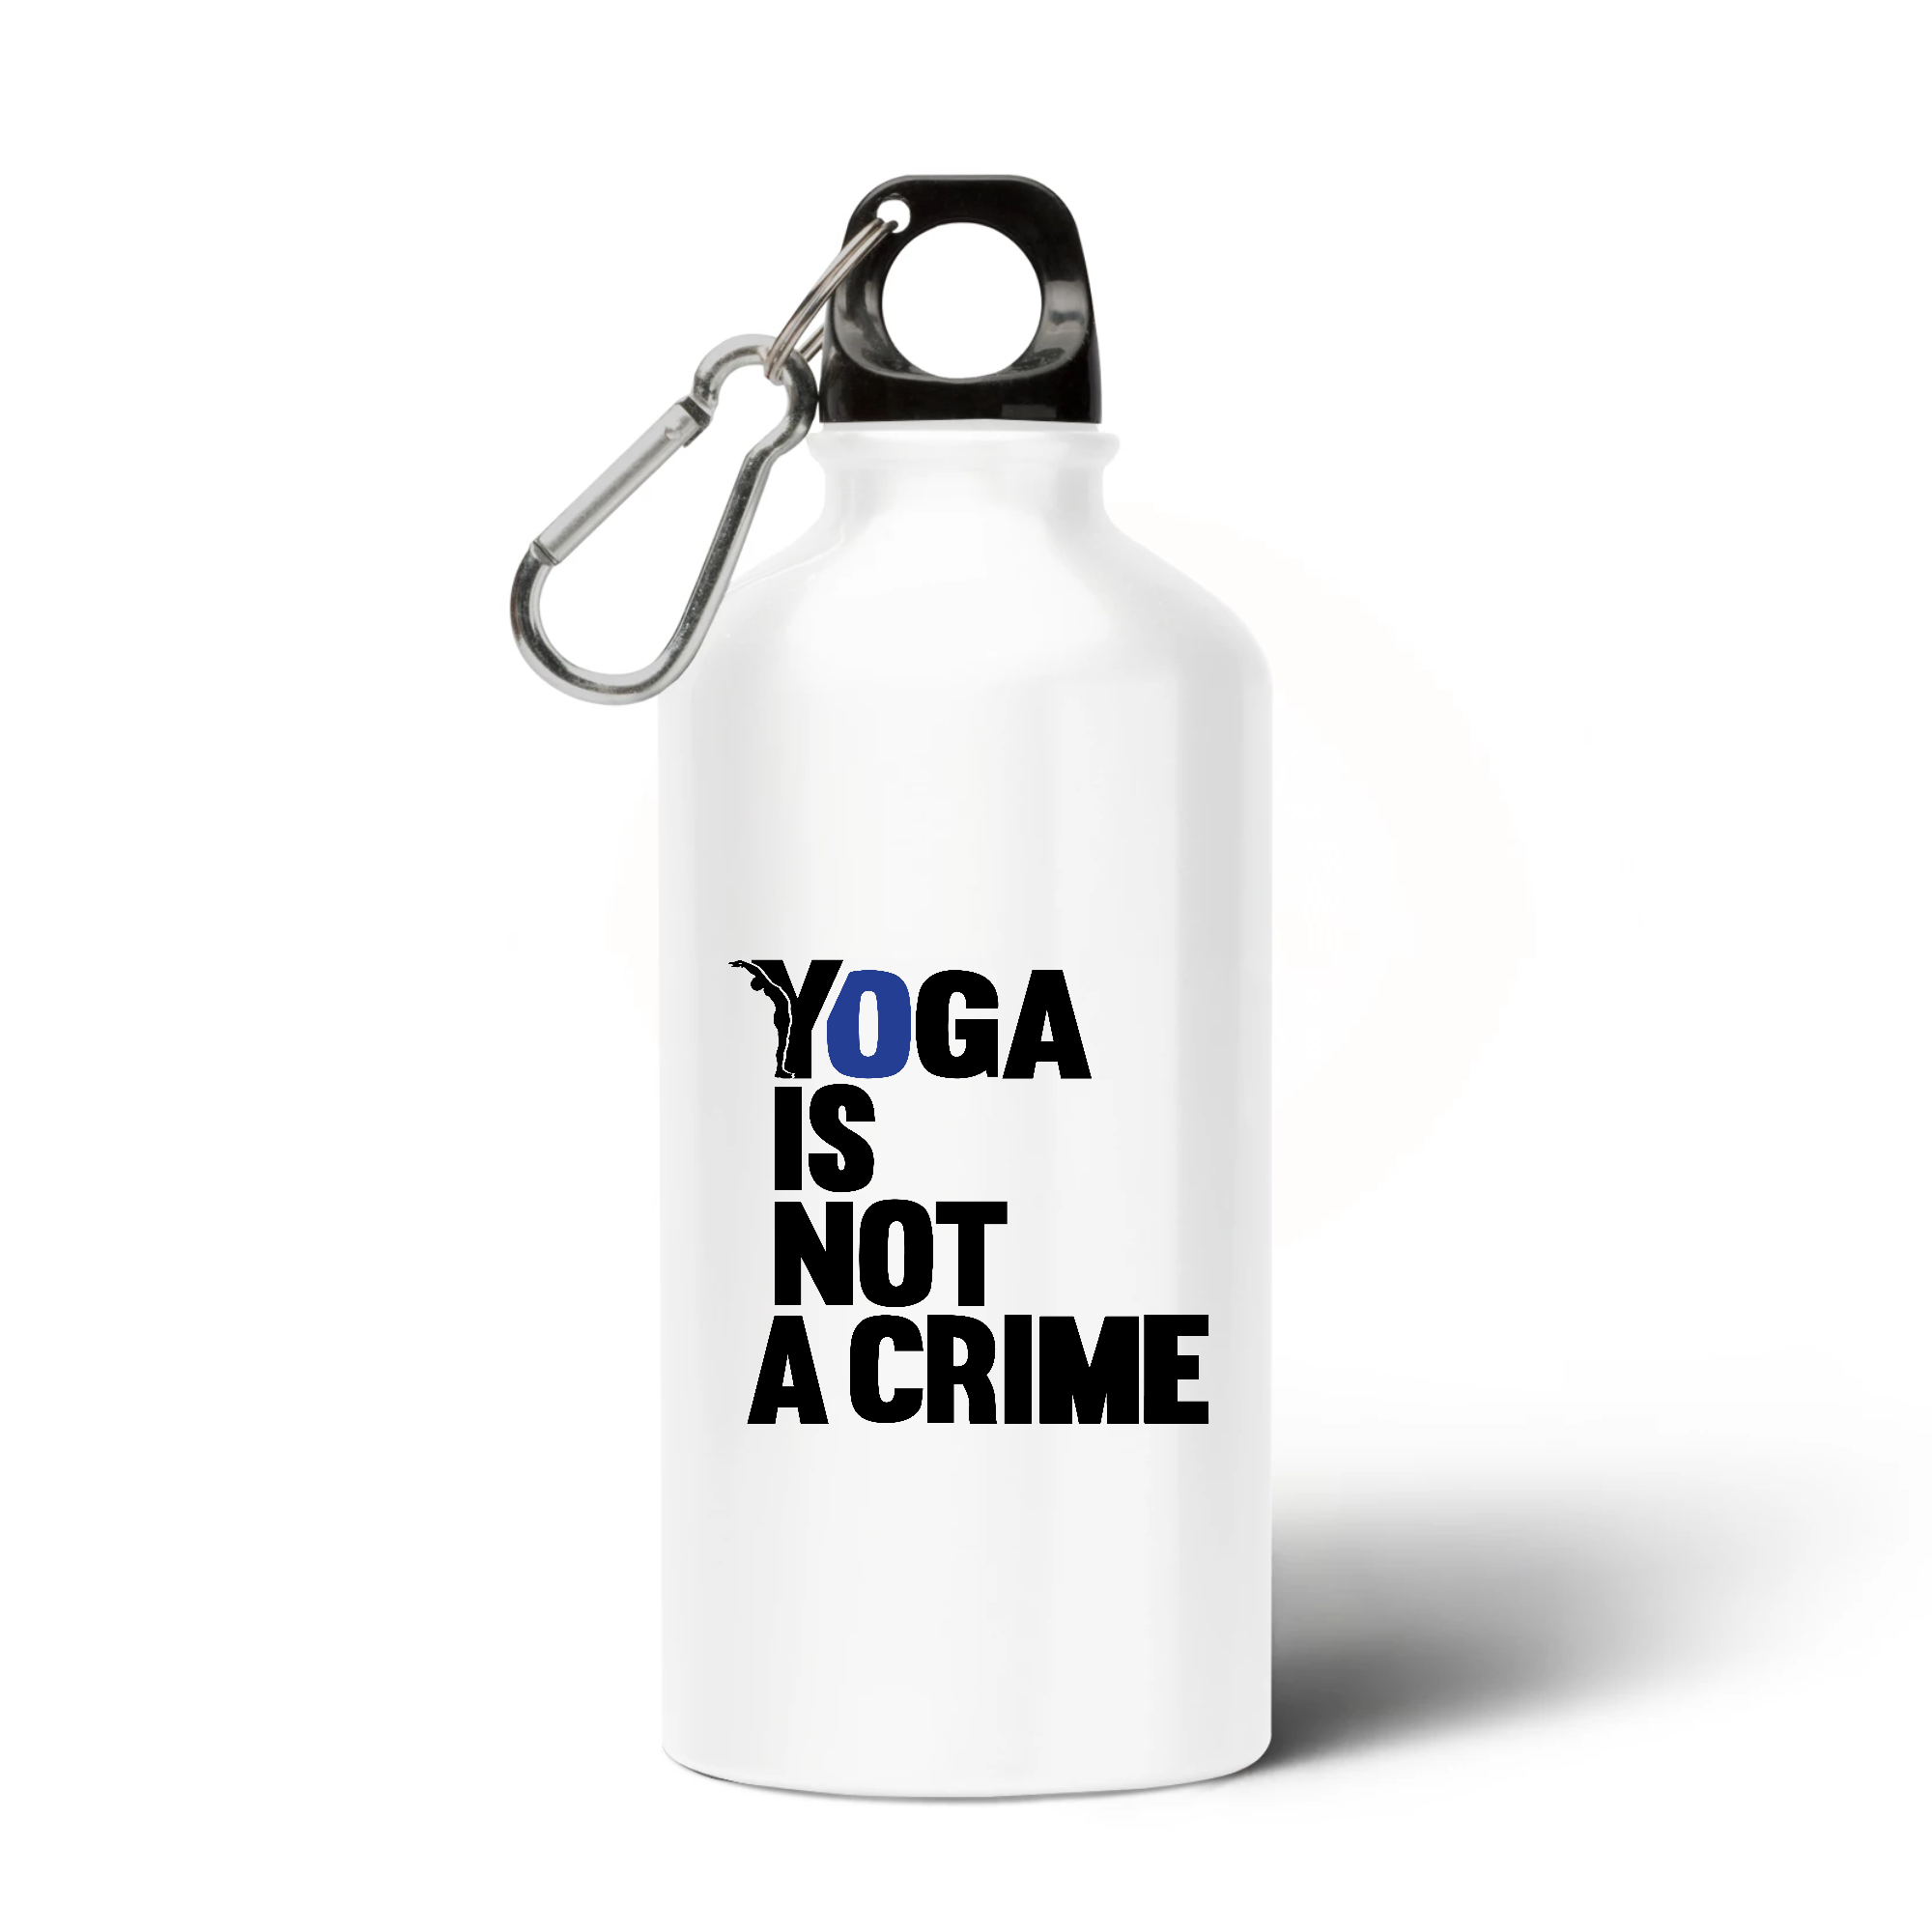 Gourde - Yoga is not a crime - 500ml-YOFE YOGA